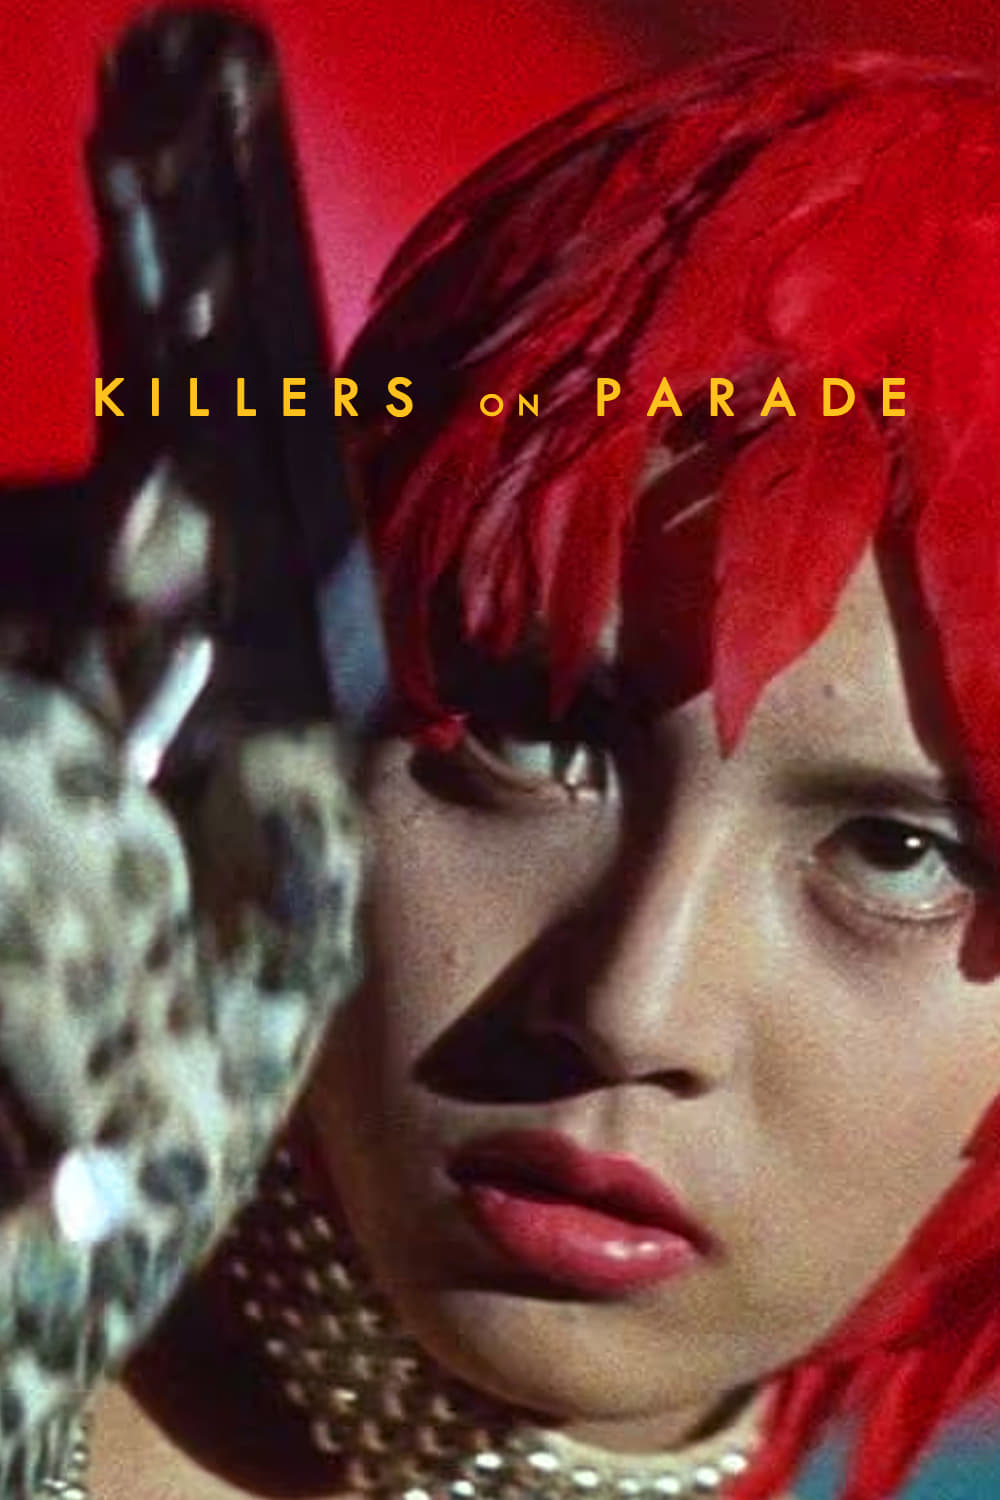 Killers on Parade